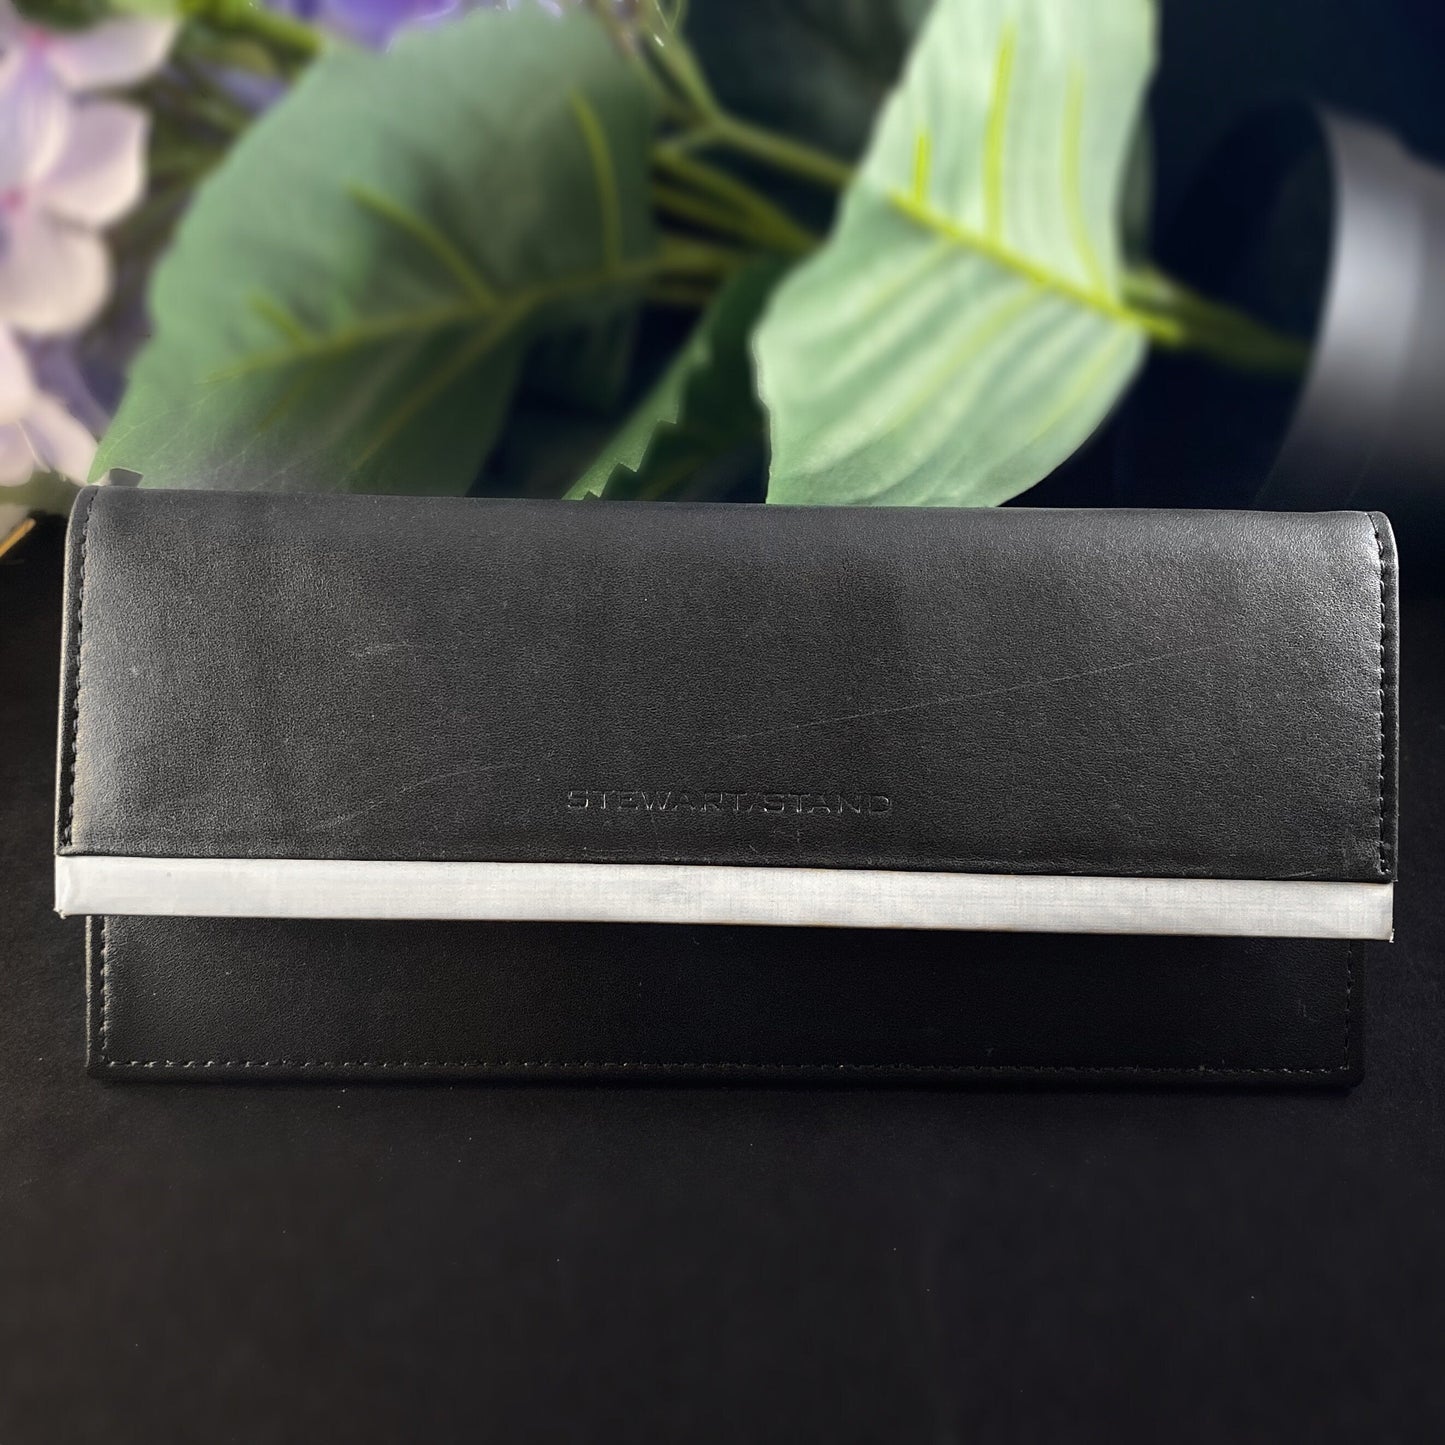 Stewart Stand Leather and Stainless Steel RFID Protection Long Slimline Clutch Wallet